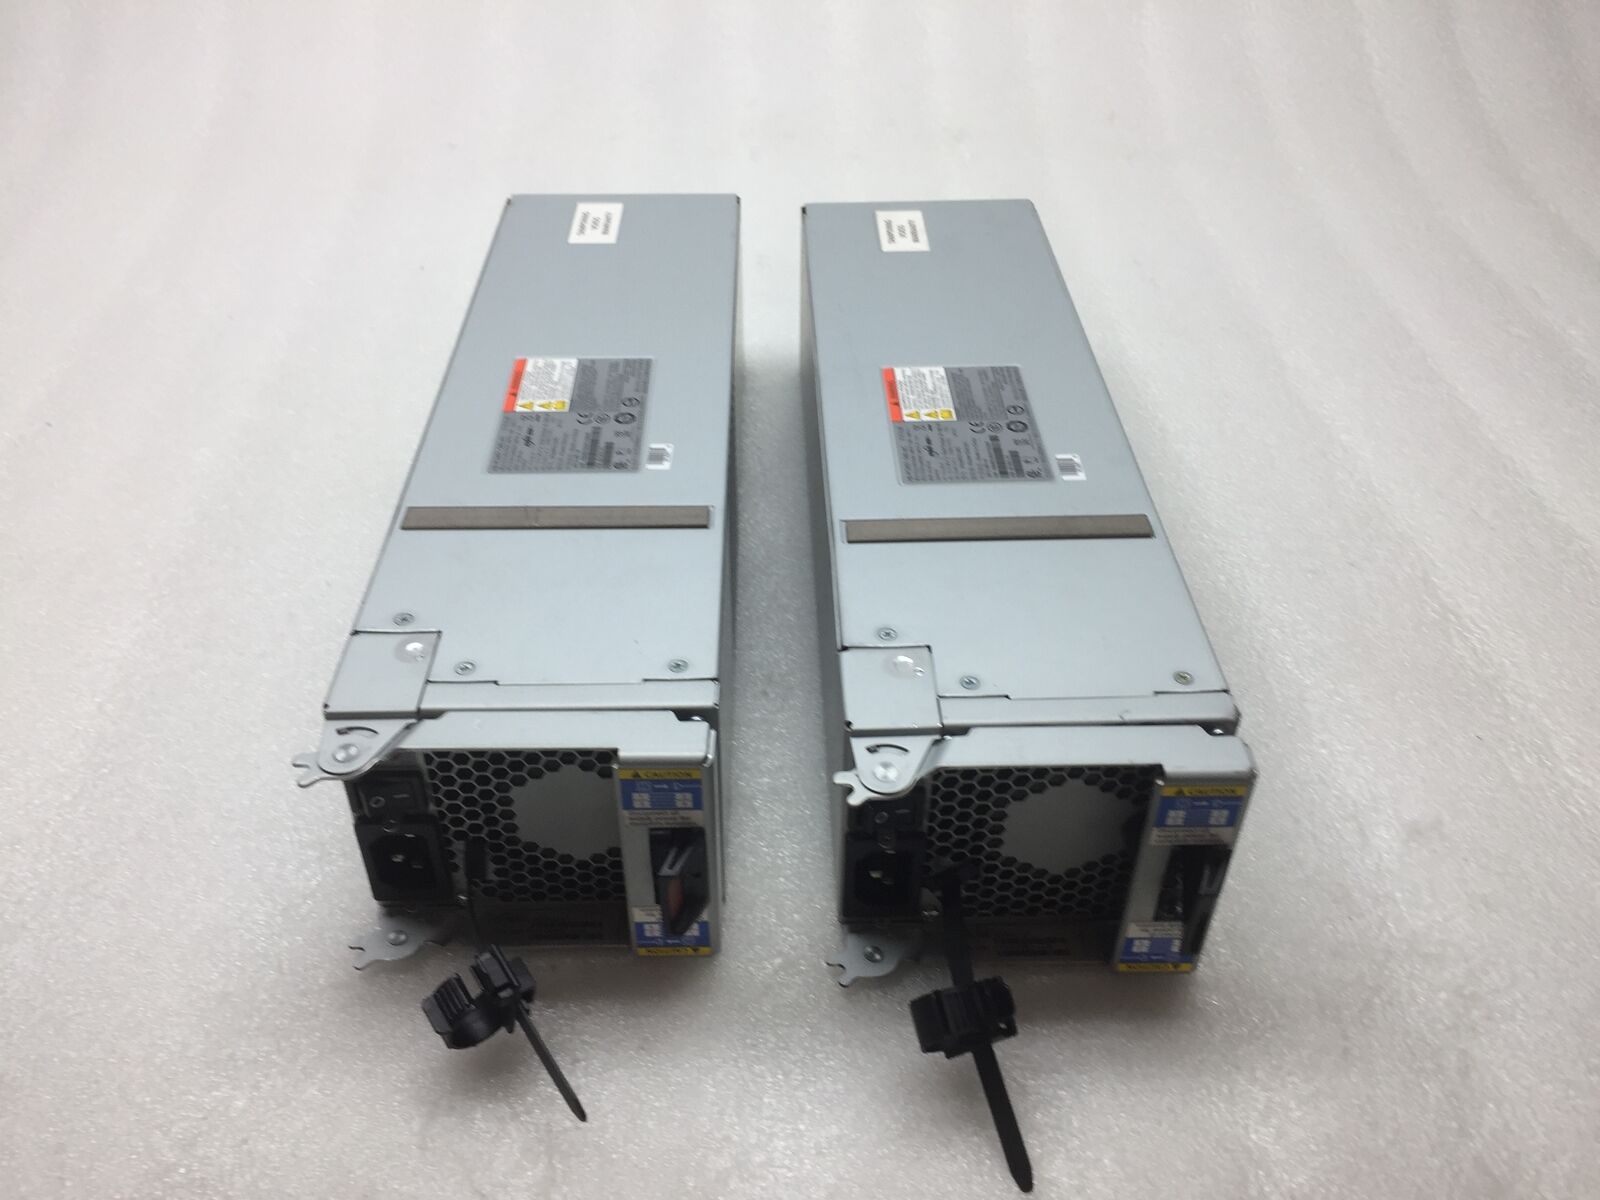 Lot of 2 Power One NetApp 580W Power Supply HB-PCM01-580-AC 82562-21  AS-IS